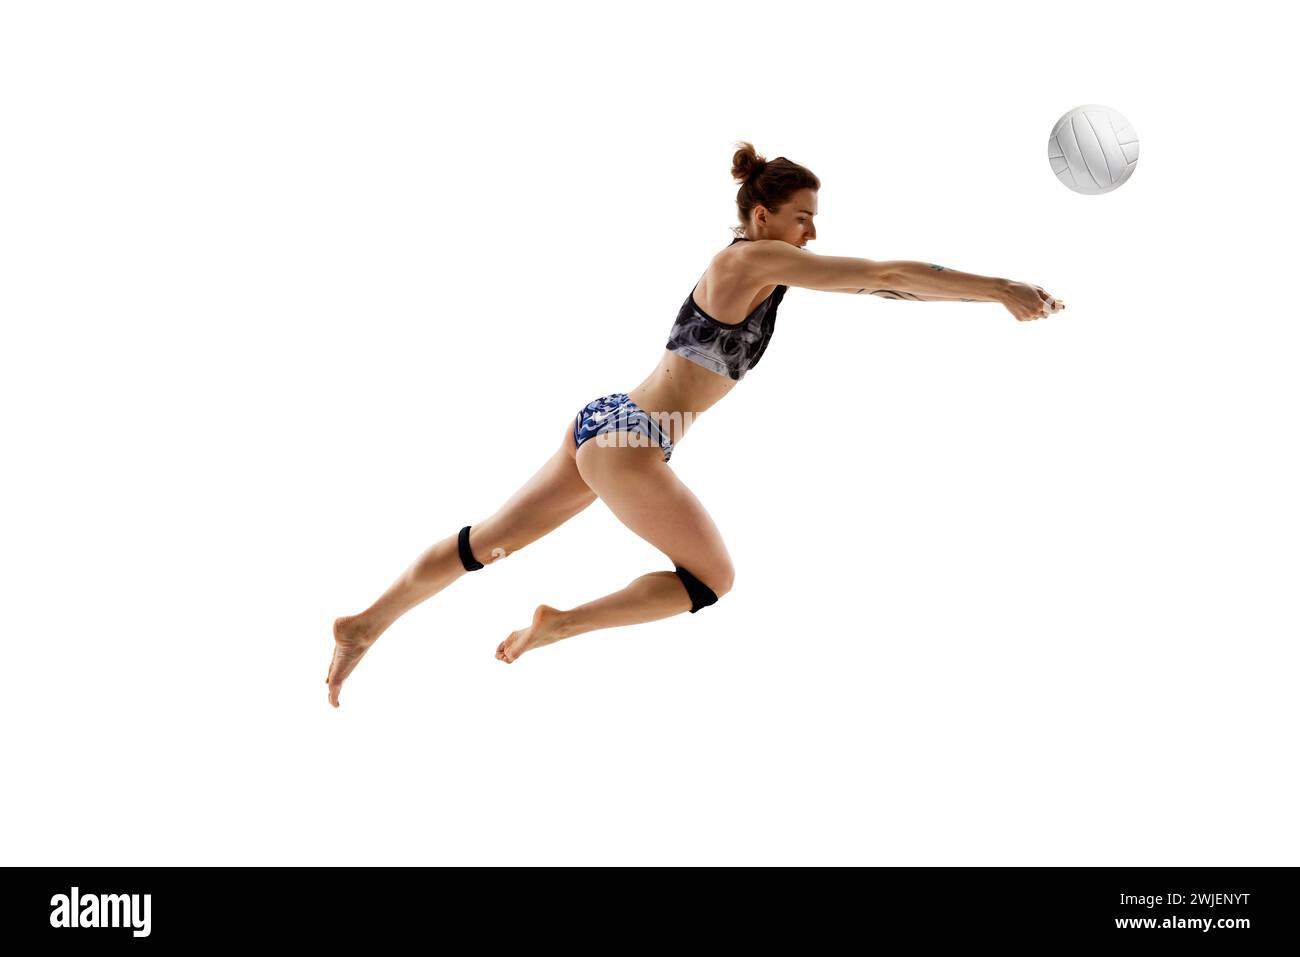 Competitive woman, skilled volleyball player in action focused on ball to serve perfect pass against white studio background. Stock Photo